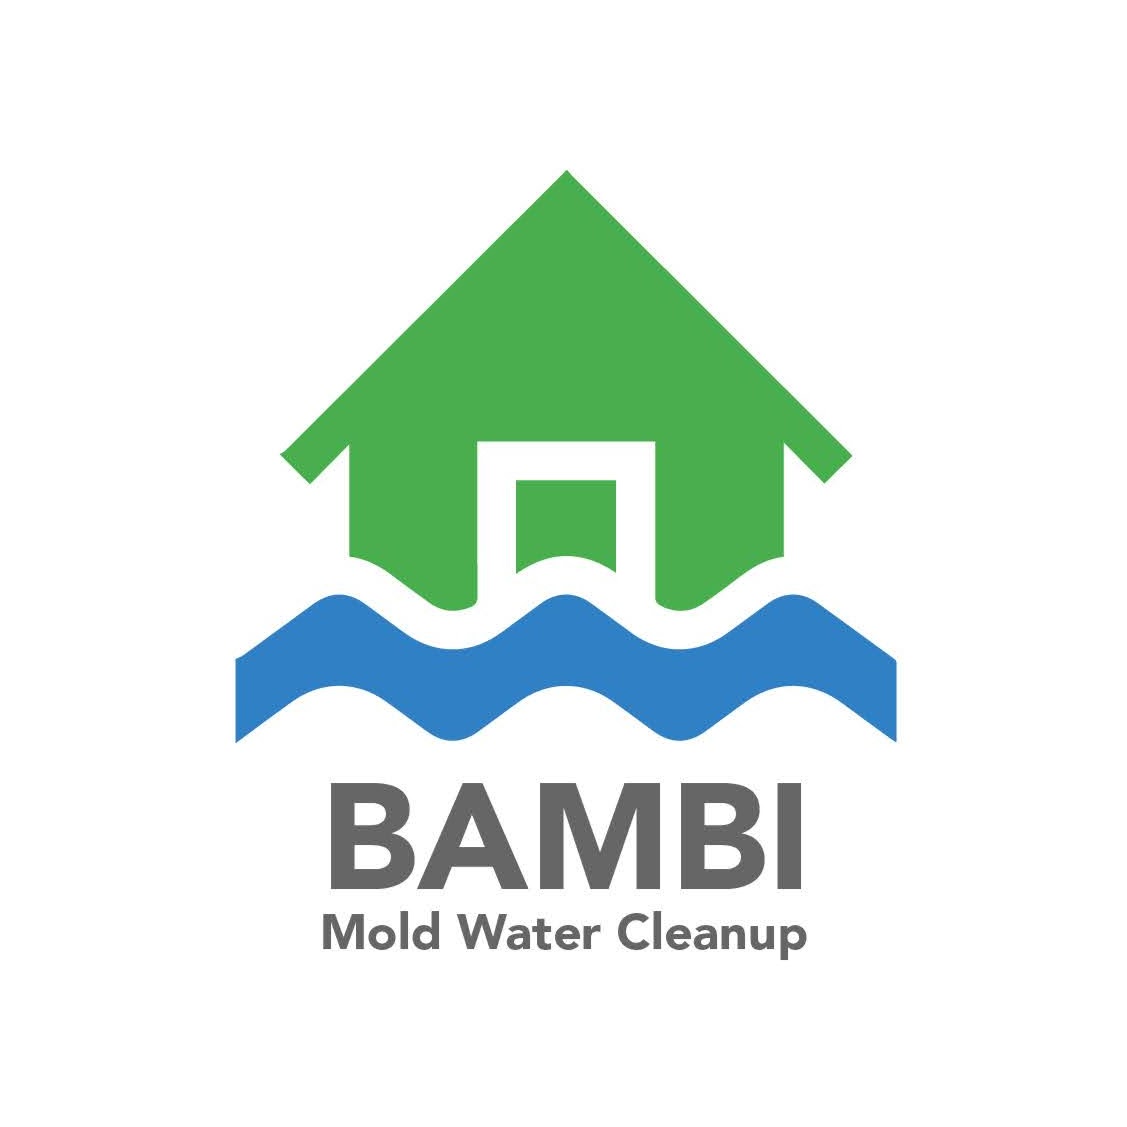 Bambi Mold Water Cleanup